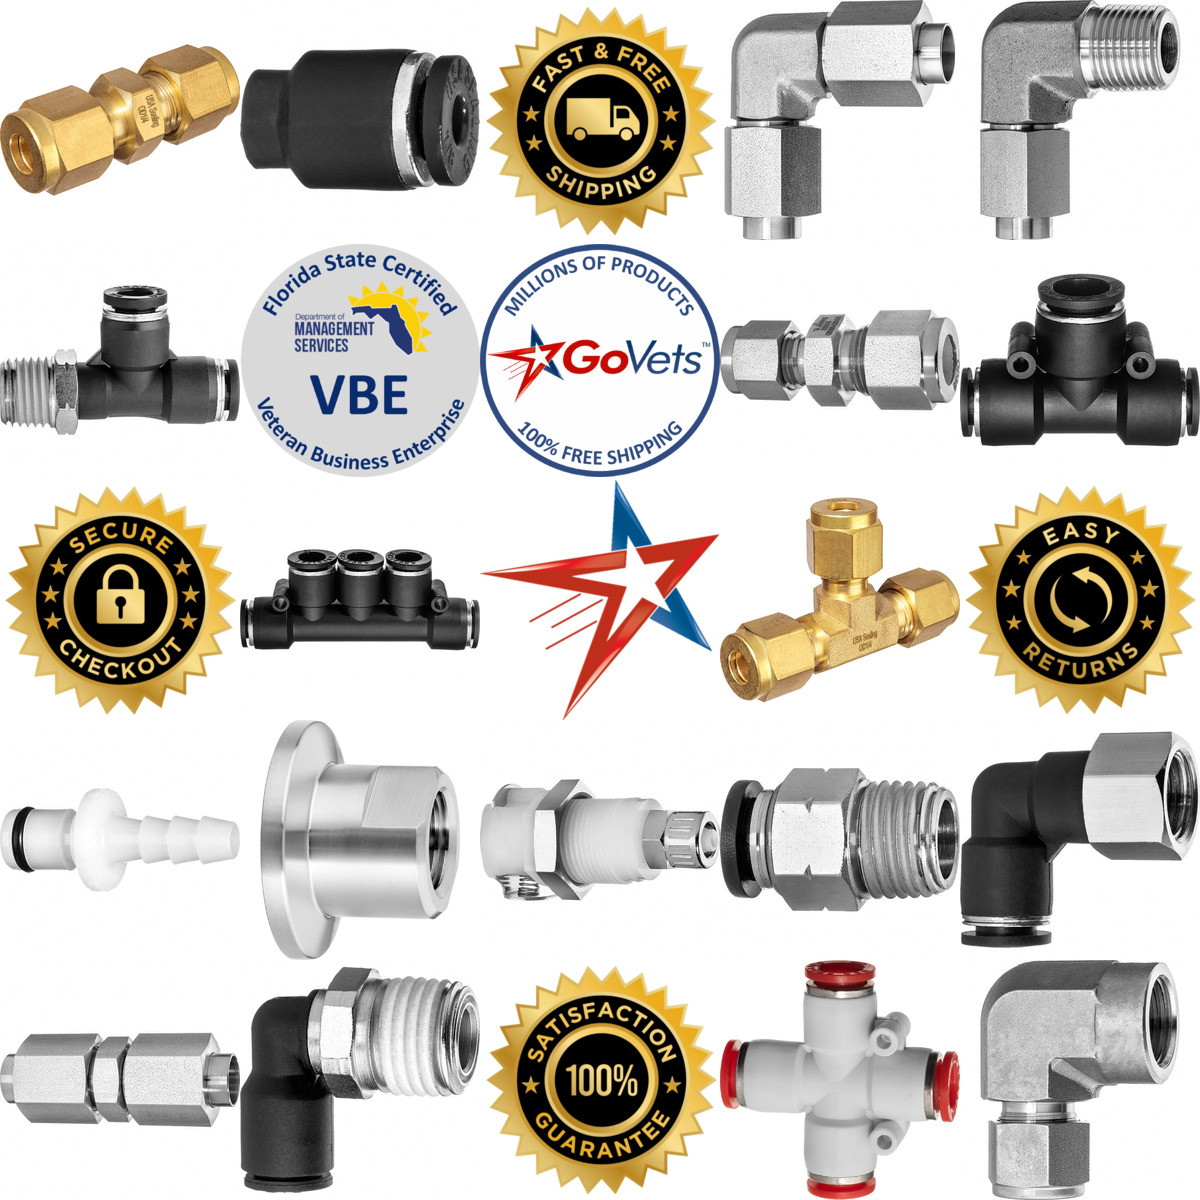 A selection of USA Industrials products on GoVets